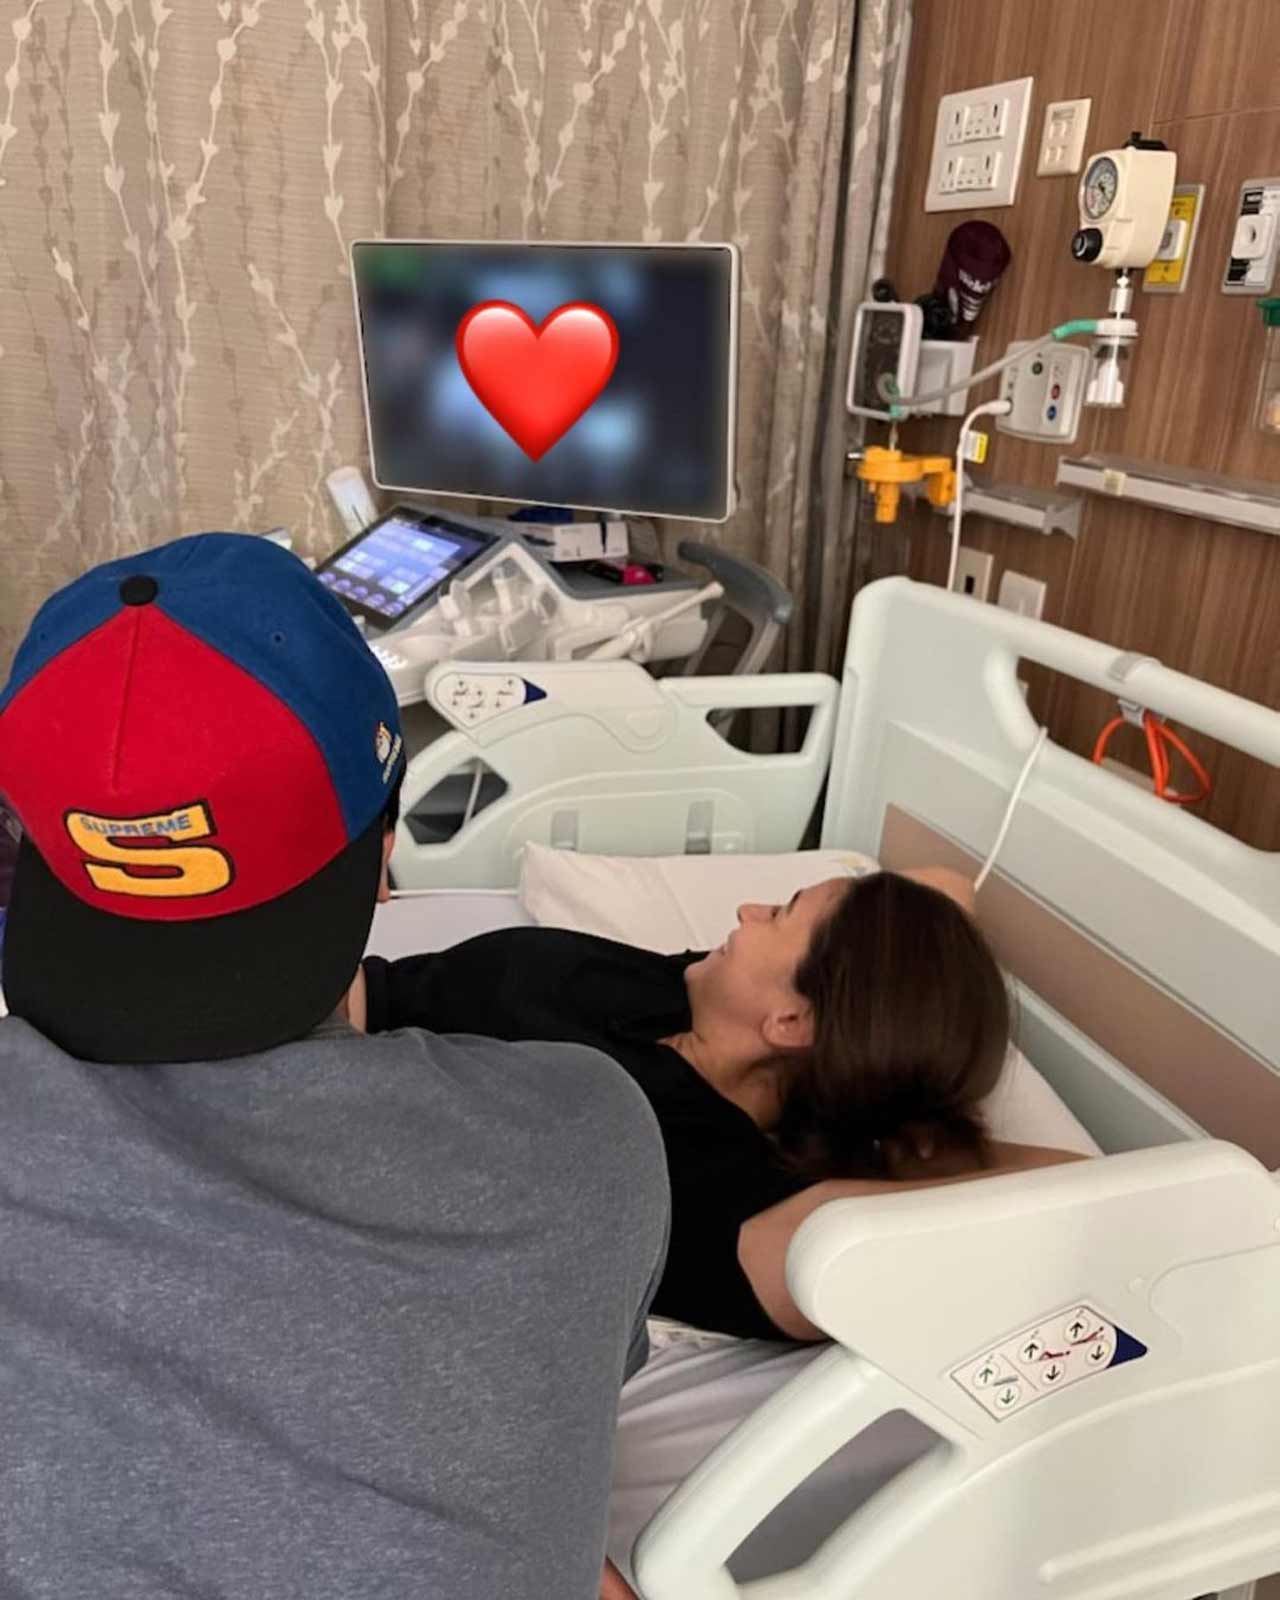 Now, Alia Bhatt, on Monday, announced the news of her pregnancy with a special post on her Instagram account. In the picture, the 'Dear Zindagi' actor can be seen in a hospital with Ranbir Kapoor, wearing a cap. She can be seen smiling and looking at the monitor, during her ultrasound, which is covered with a heart emoticon. Sharing this post, the 'Kapoor and Sons' actor captioned, 